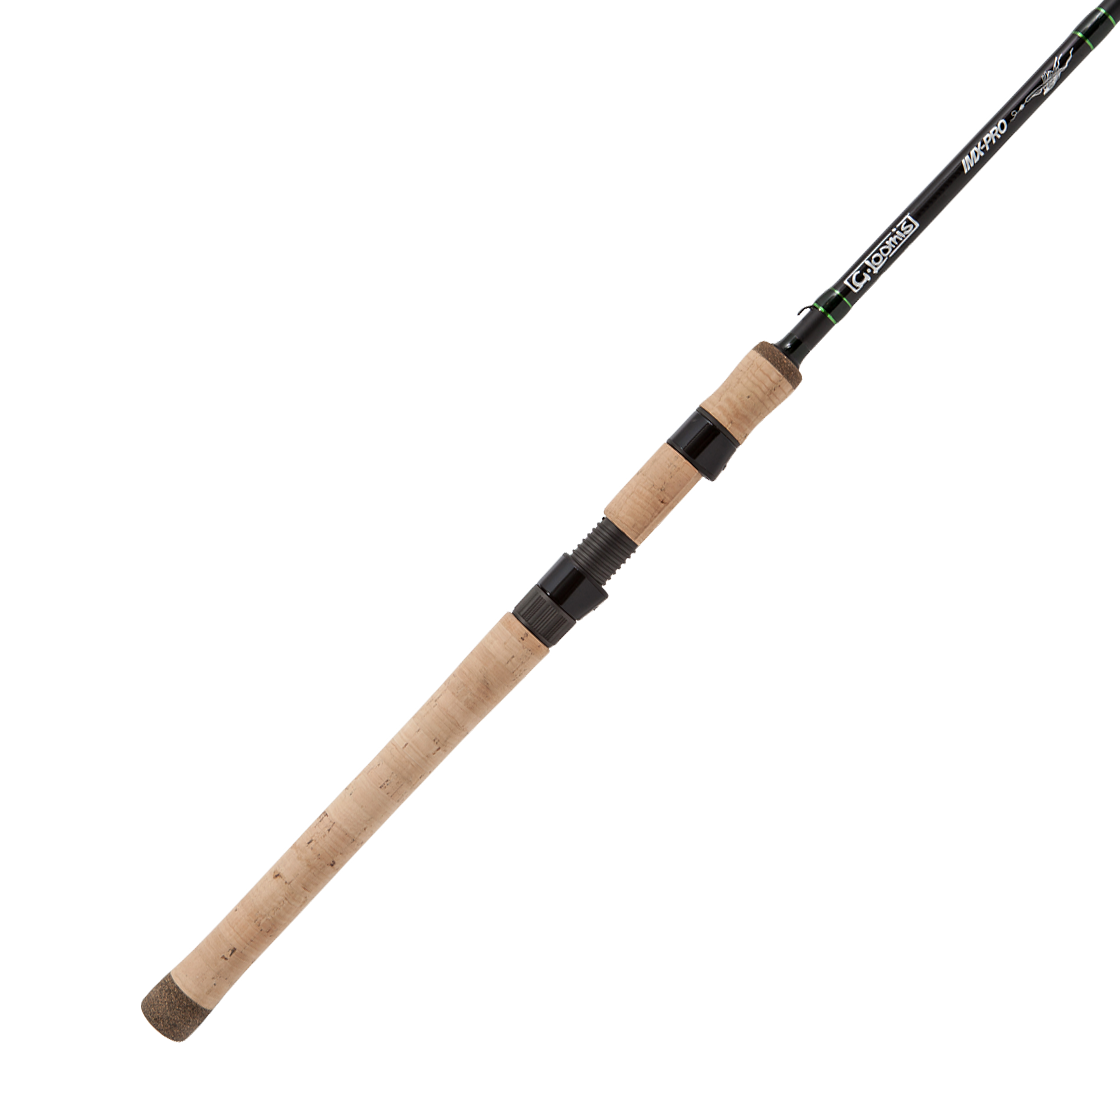 G.Loomis & Shimano Fishing  Hi , guys recently ordered some rods